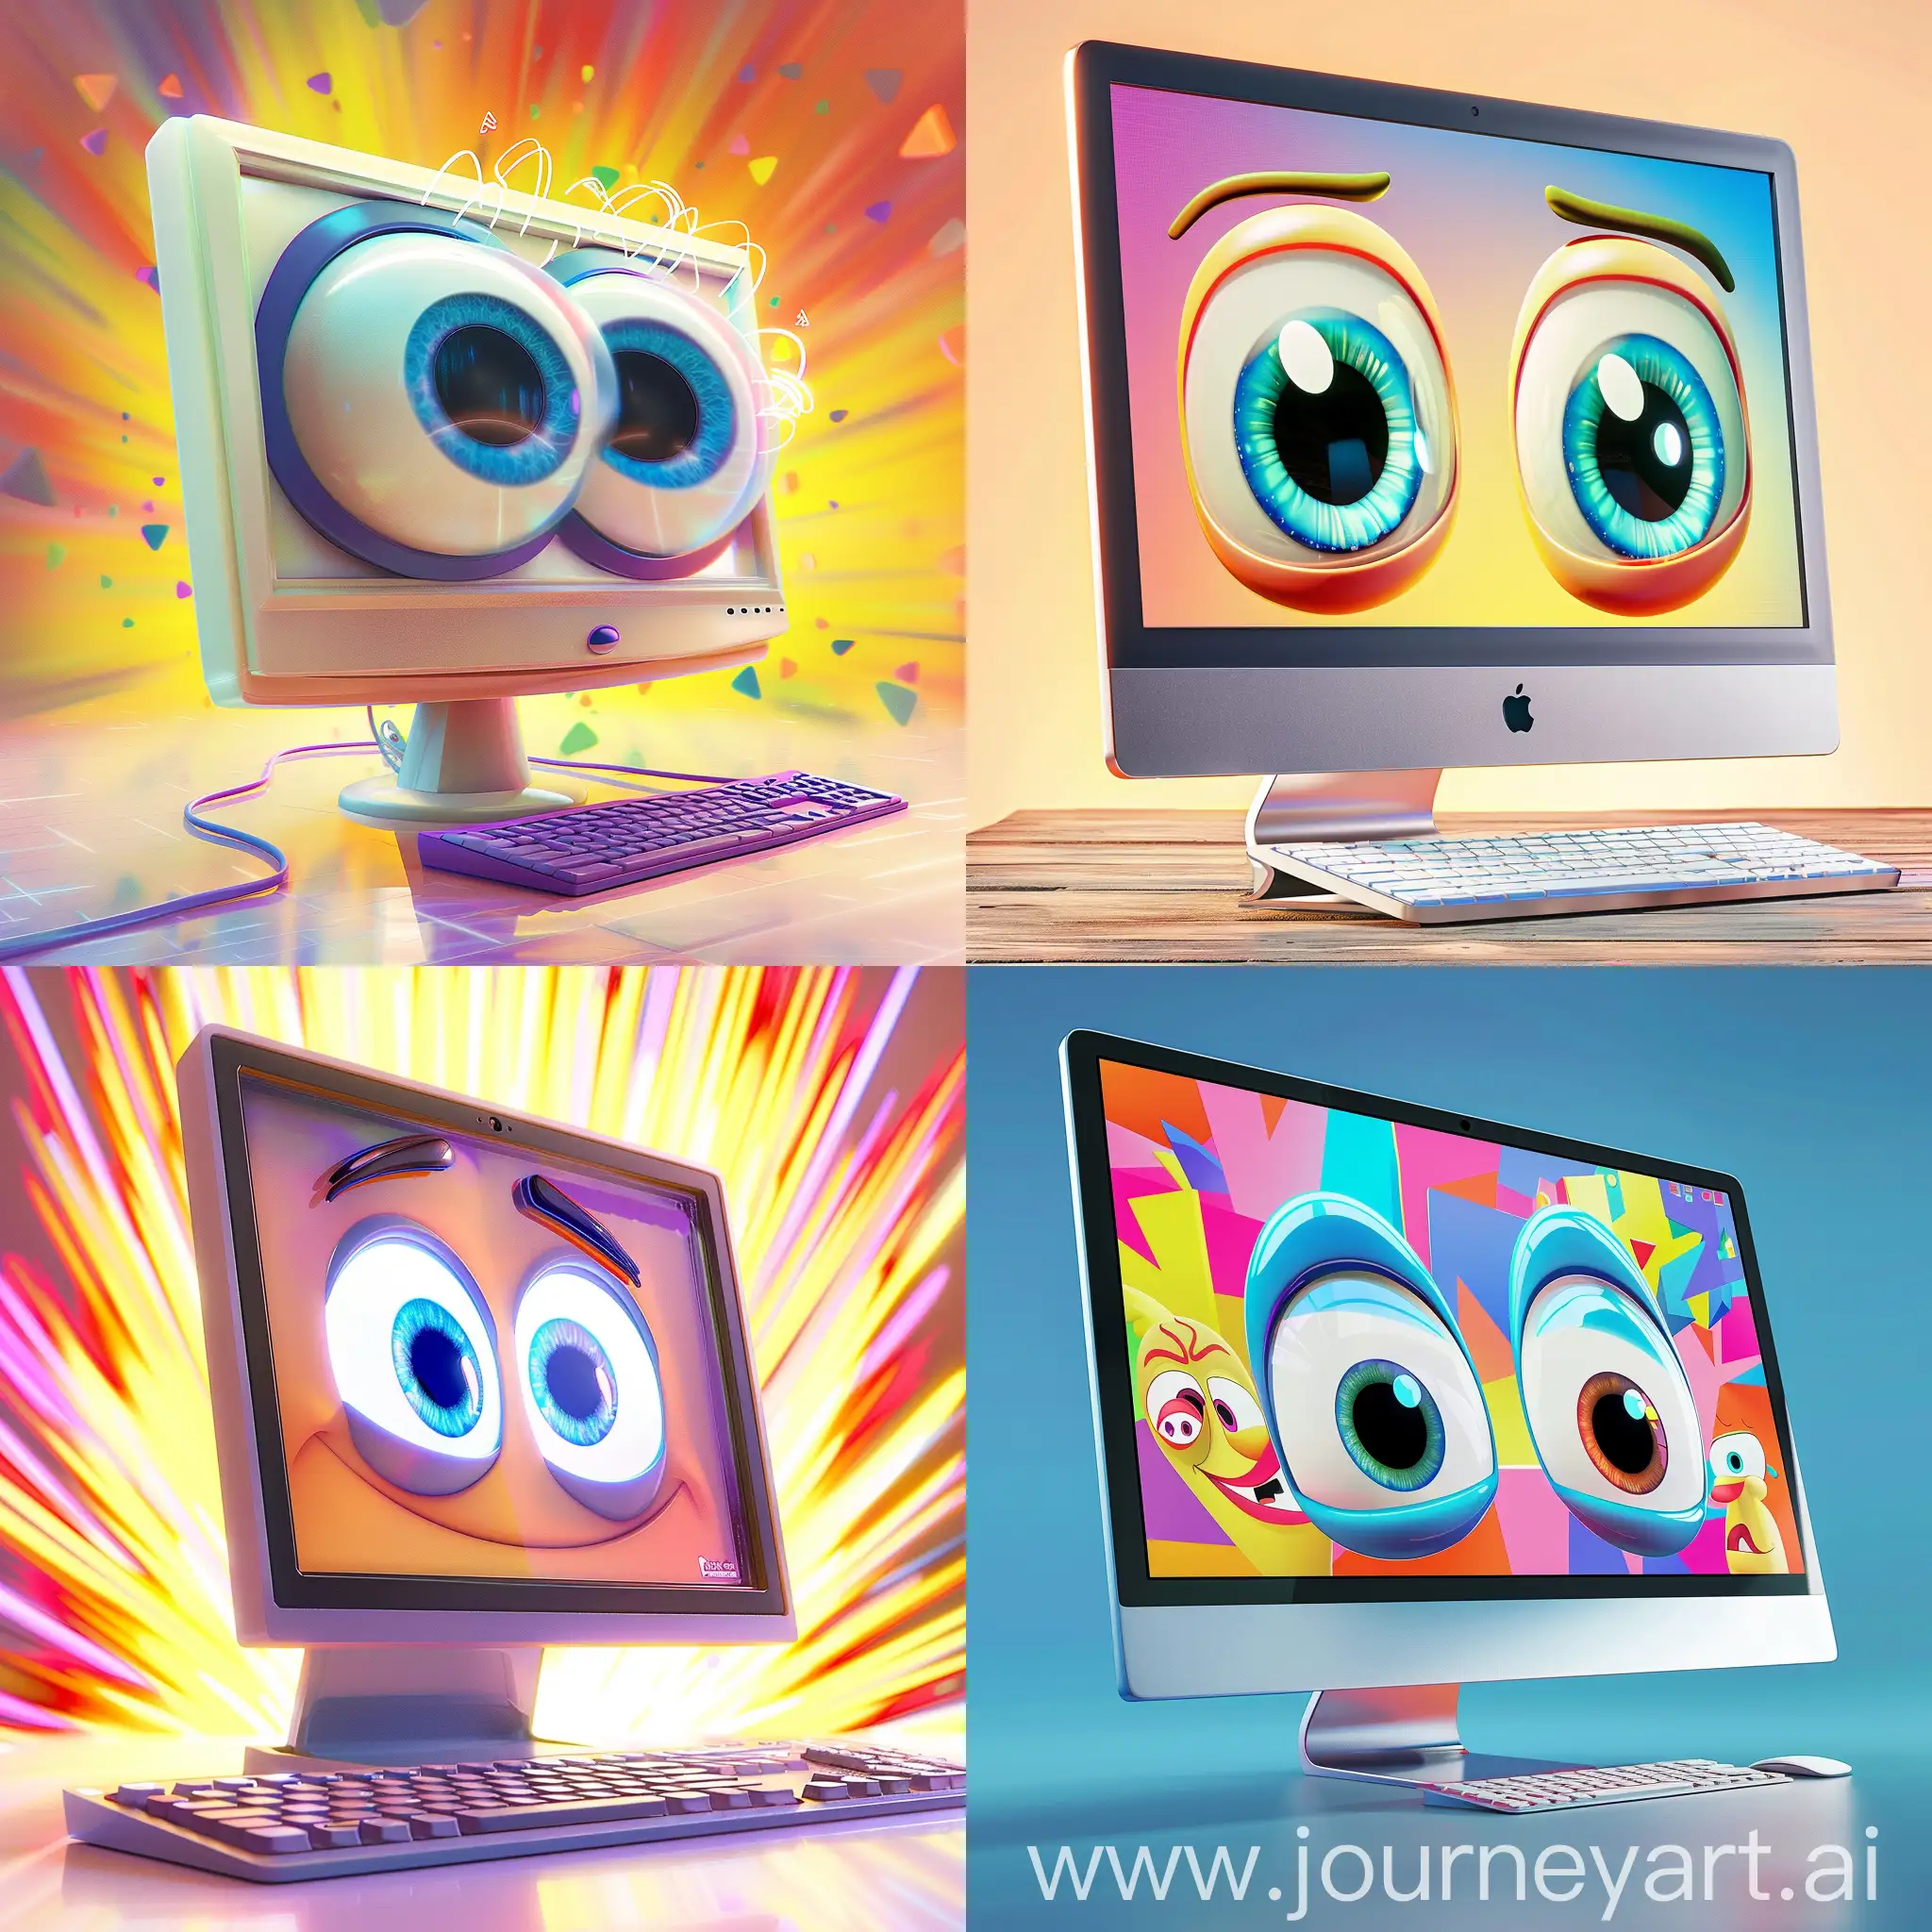 Emotional-Computer-with-Big-Eyes-on-Bright-Background